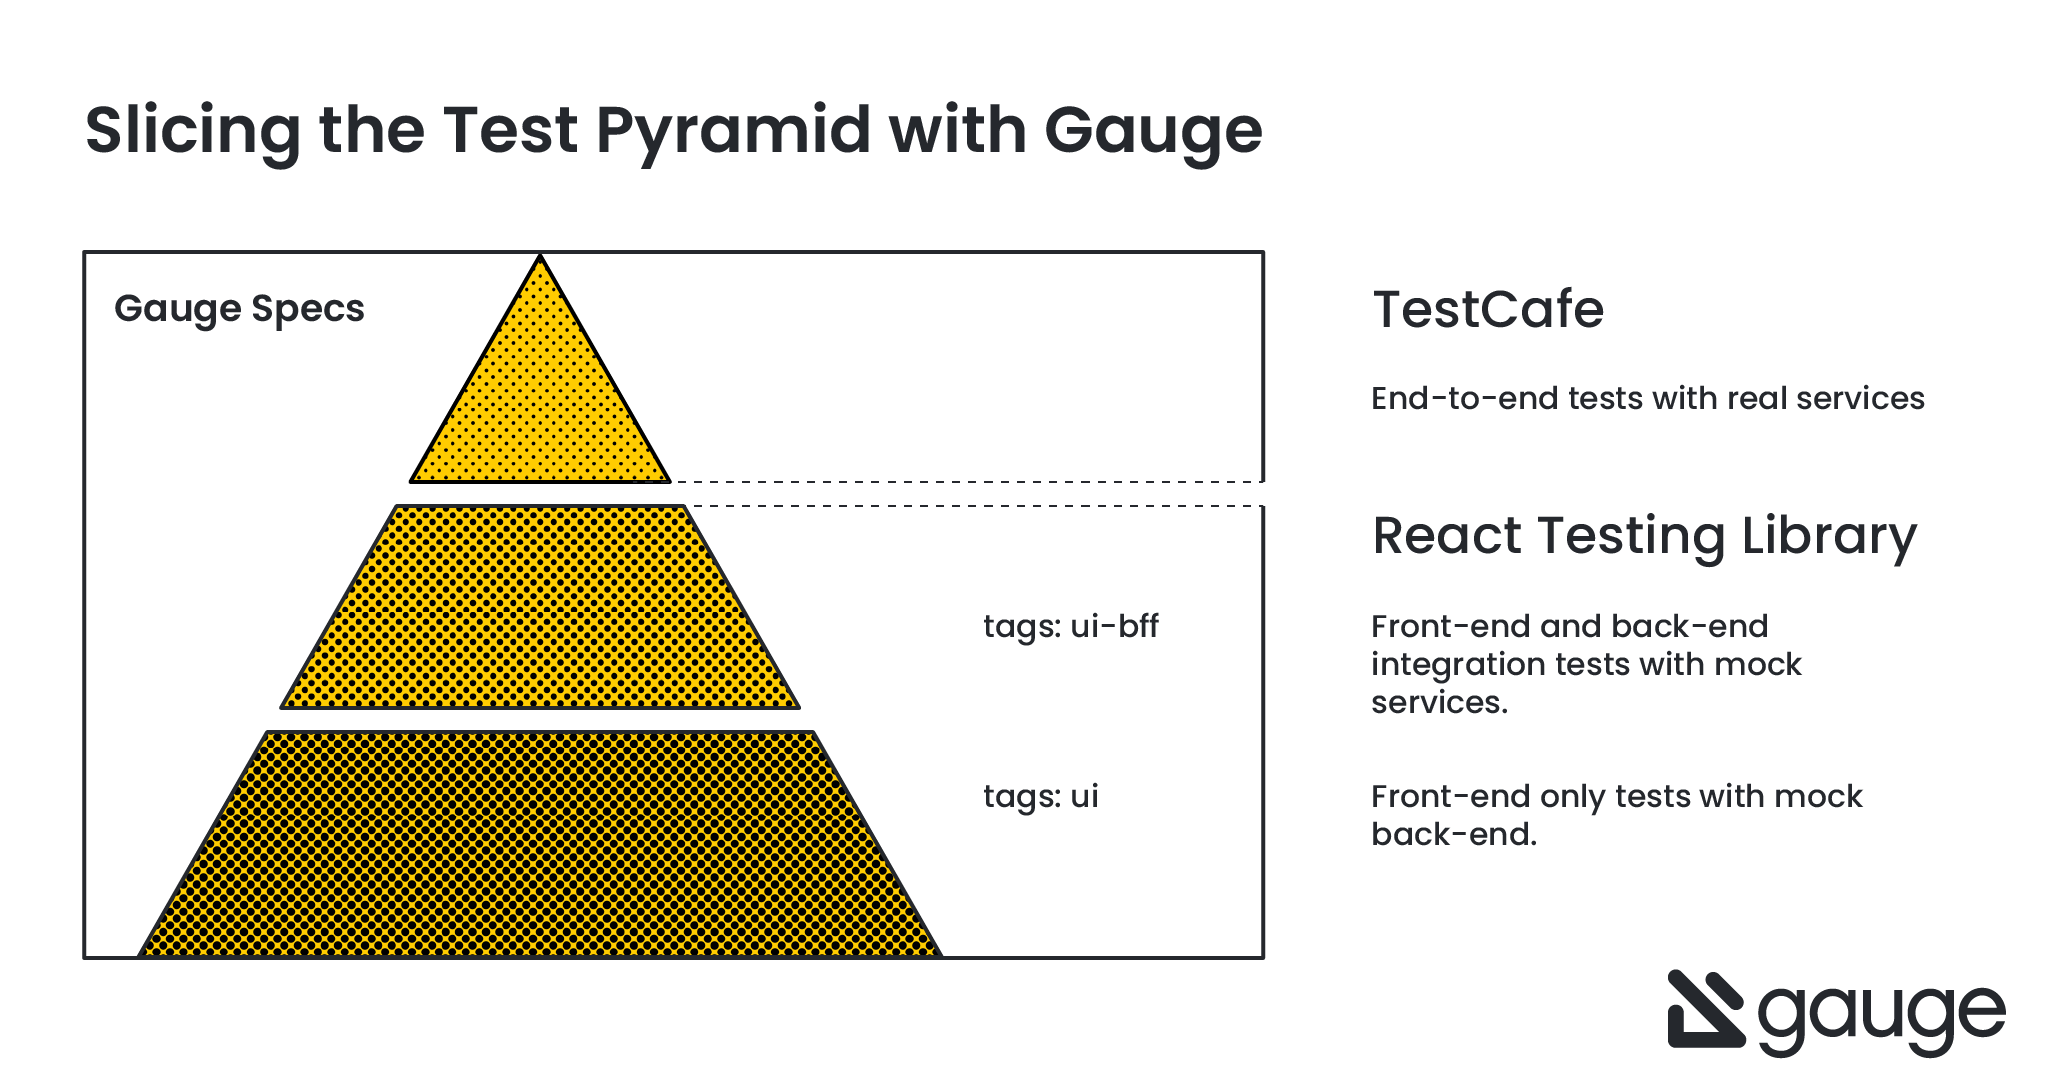 How Gauge tests fit into our test pyramid